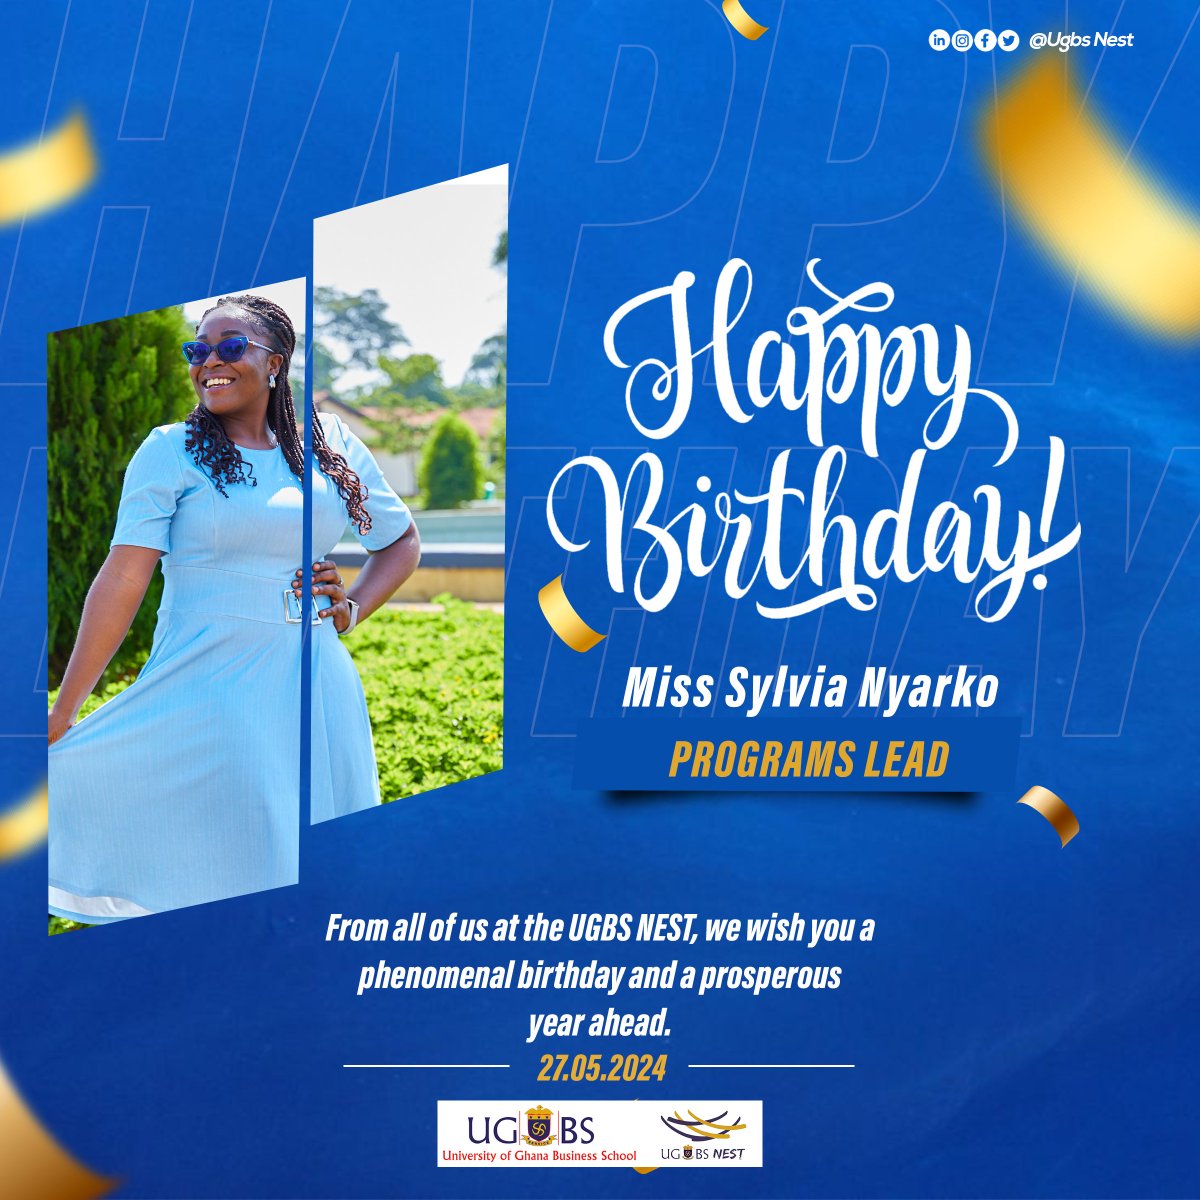 Today we celebrate a core member of our team. We wish you a phenomenal birthday and a prosperous year ahead.

hashtag#ug hashtag#ugbsofficial hashtag#ugbsiih hashtag#birthday